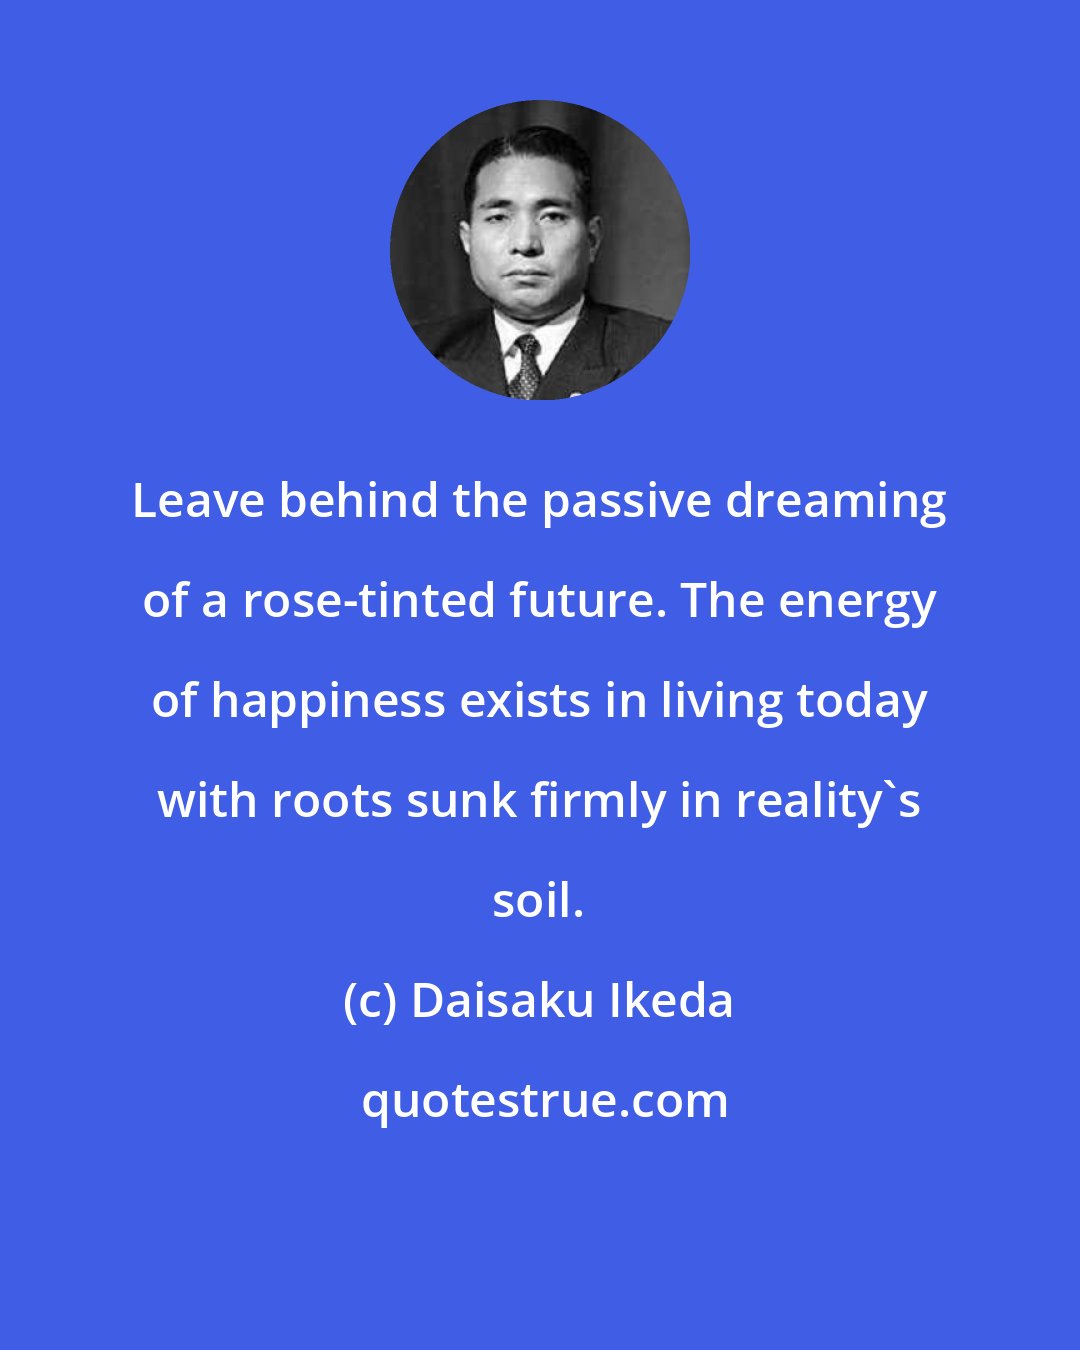 Daisaku Ikeda: Leave behind the passive dreaming of a rose-tinted future. The energy of happiness exists in living today with roots sunk firmly in reality's soil.